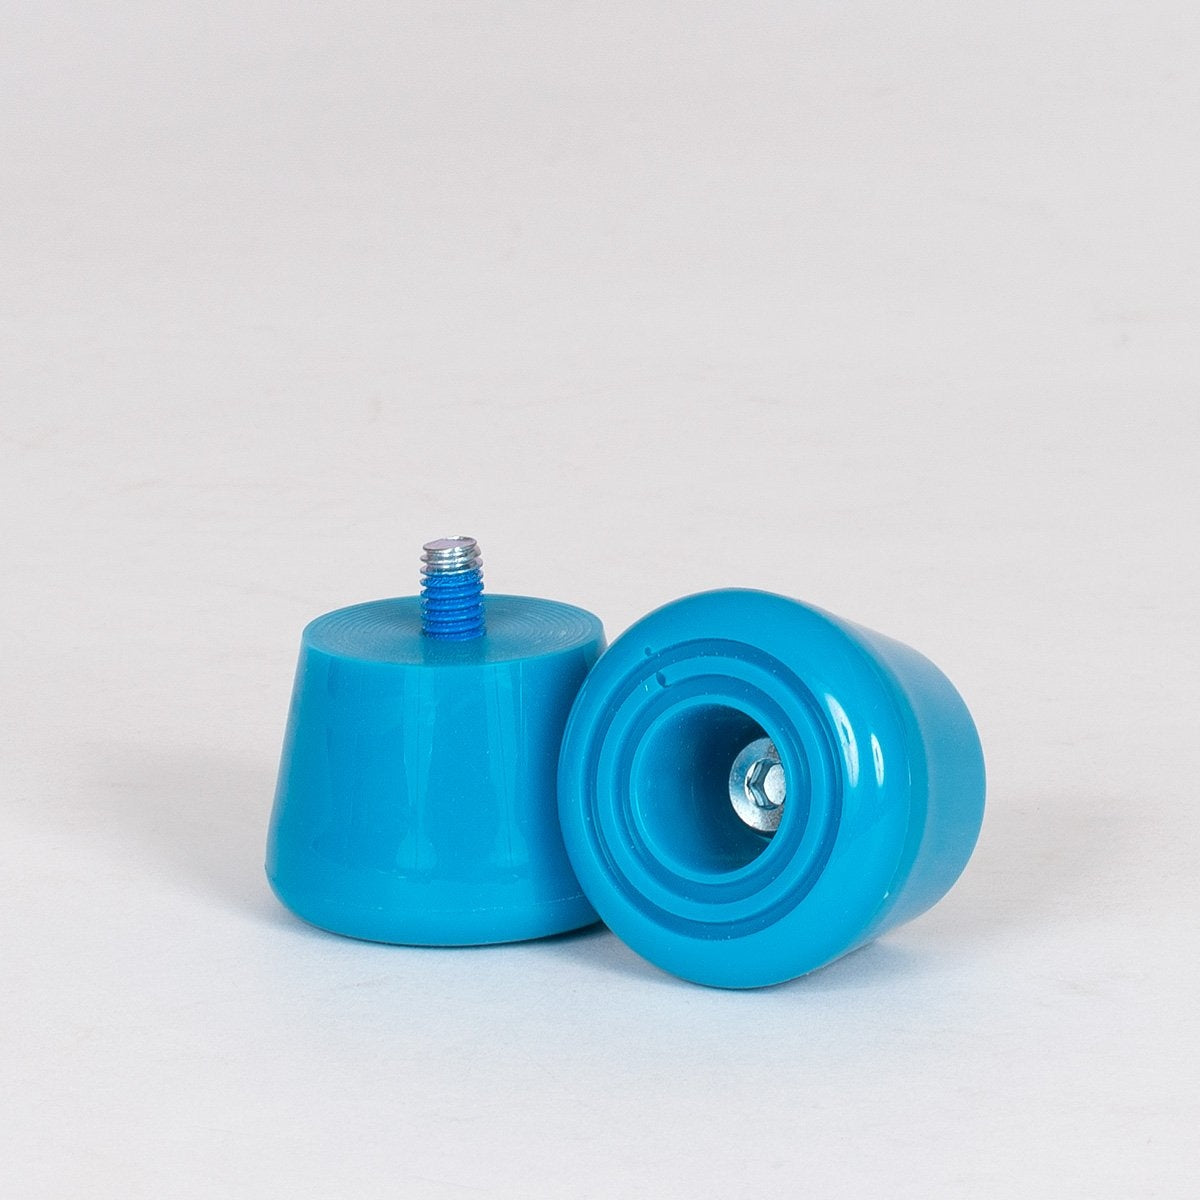 Rio Roller Toe Stoppers x2 Blue - Skates